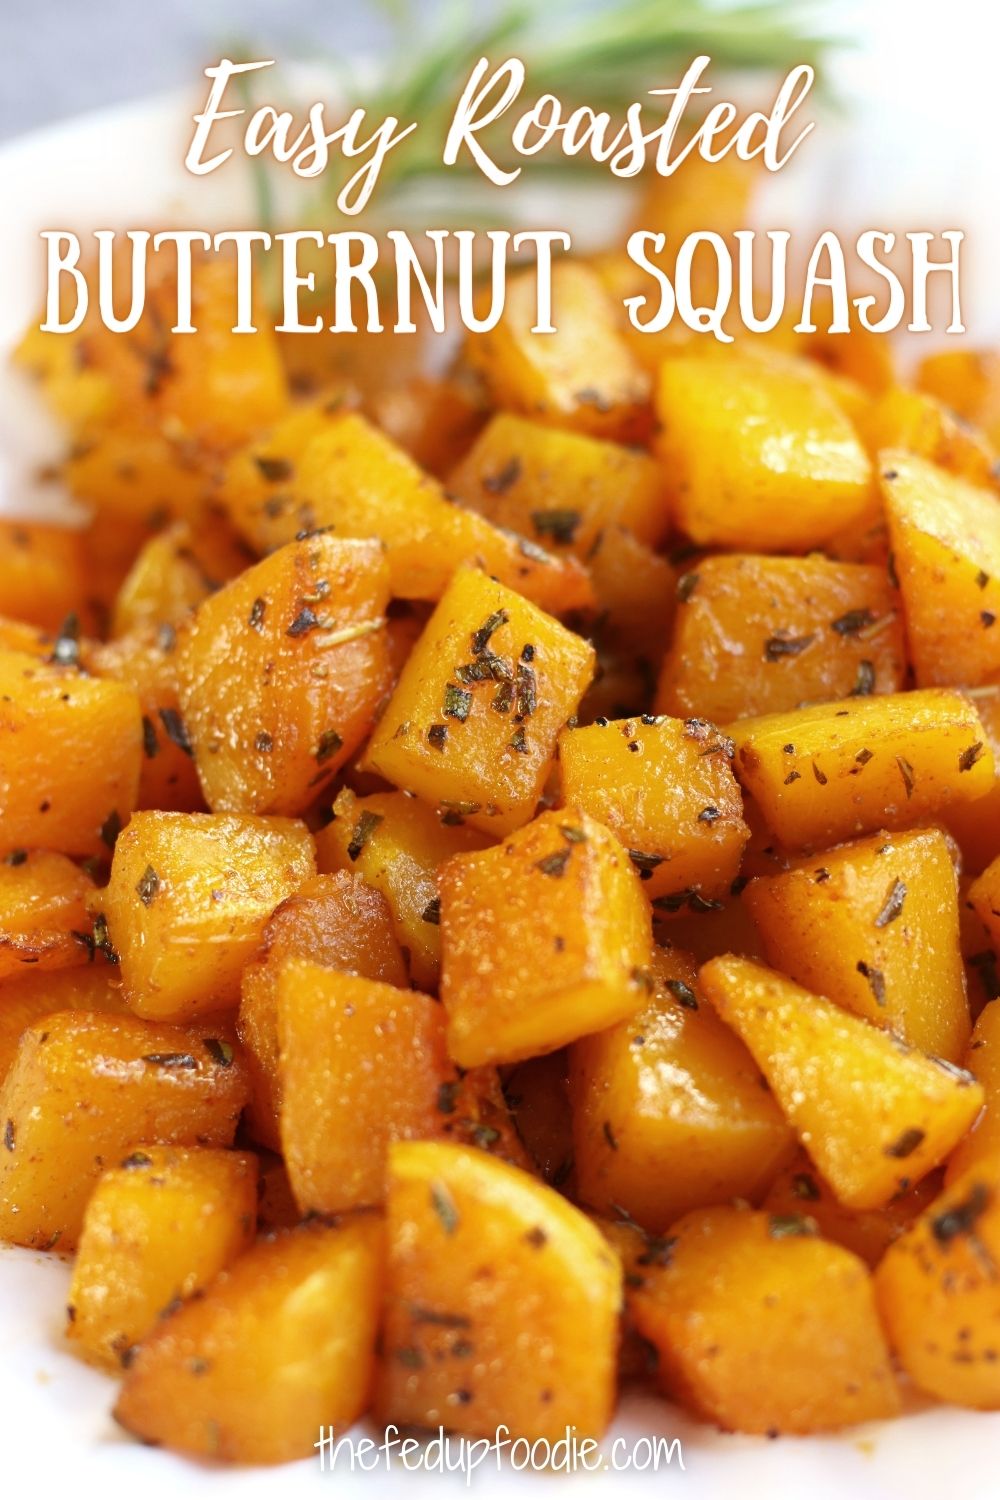 Easy Oven Roasted Butternut Squash with Rosemary